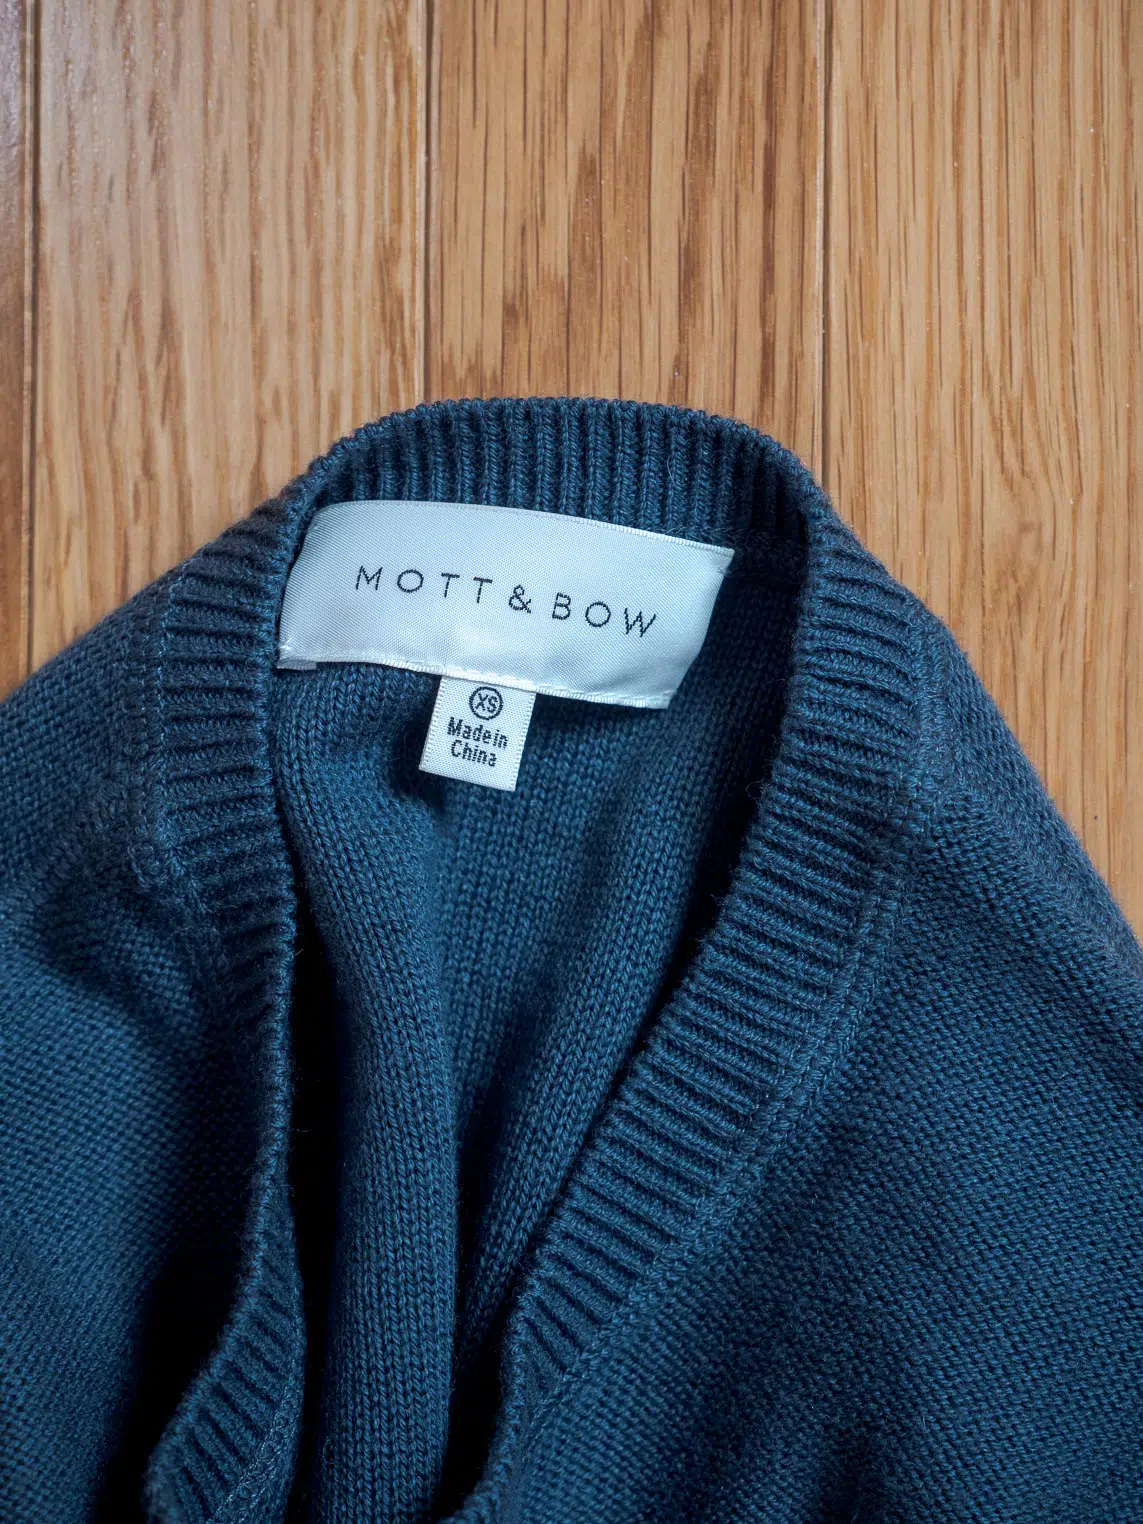 Mott and Bow XS sweater